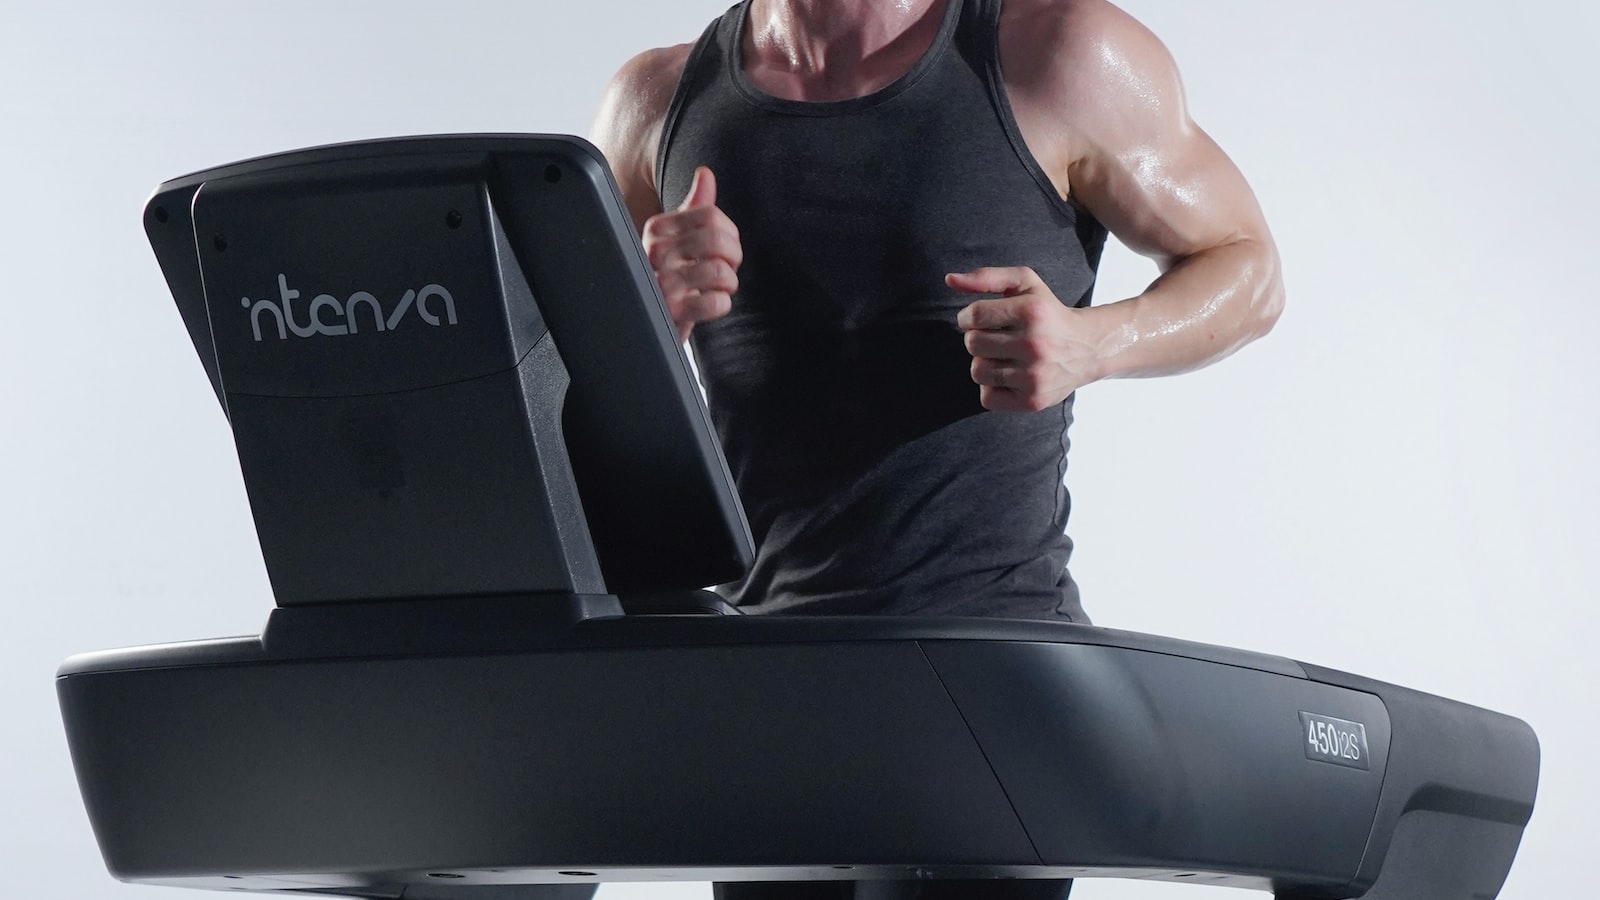 Treadmill safety guidelines for commercial gyms